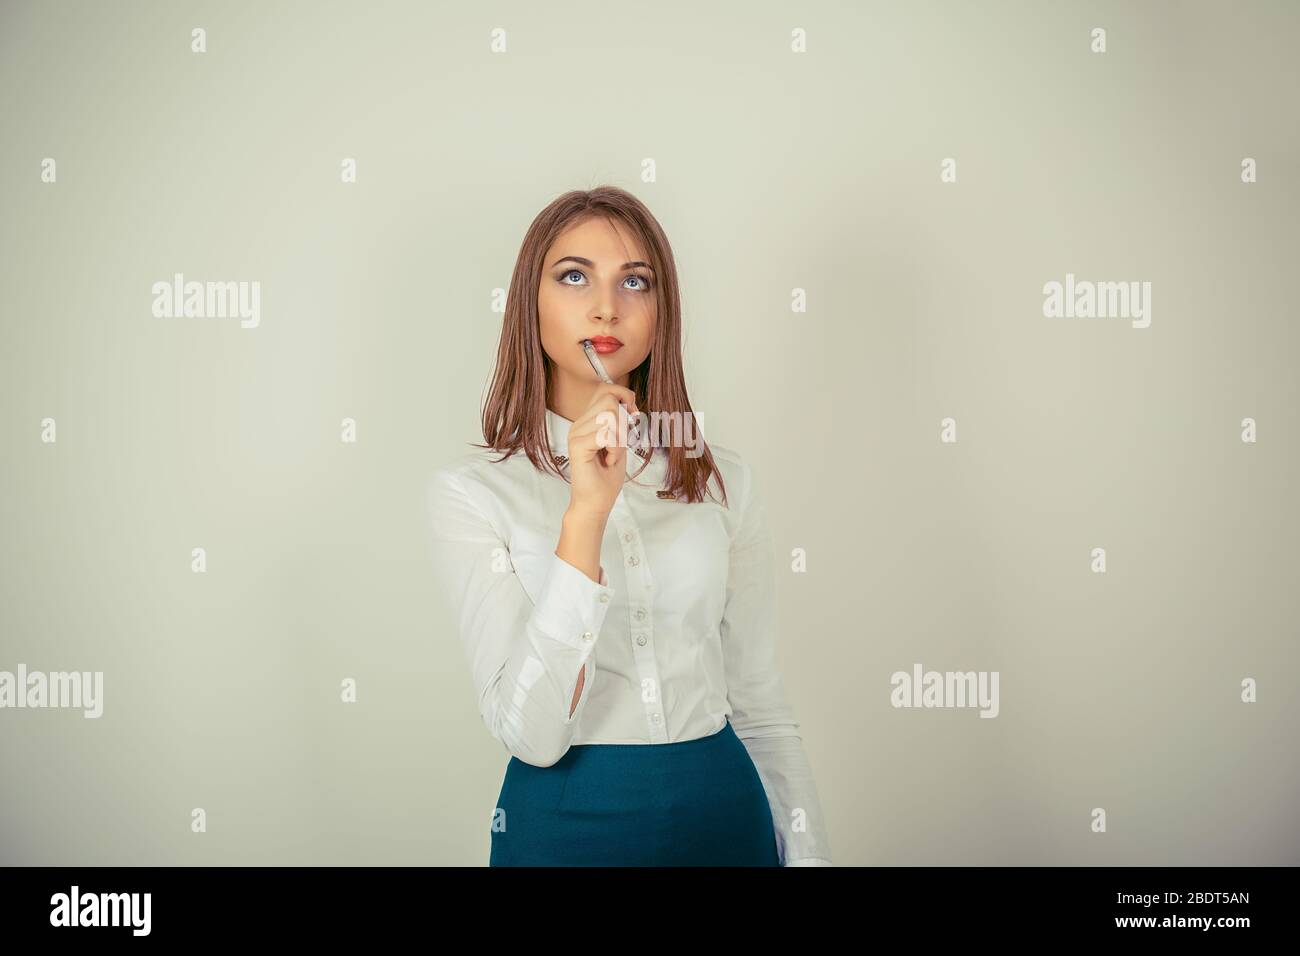 Pondering, planning. Closeup portrait of young woman thinking daydreaming deeply about something looking up isolated on white green background. Human Stock Photo